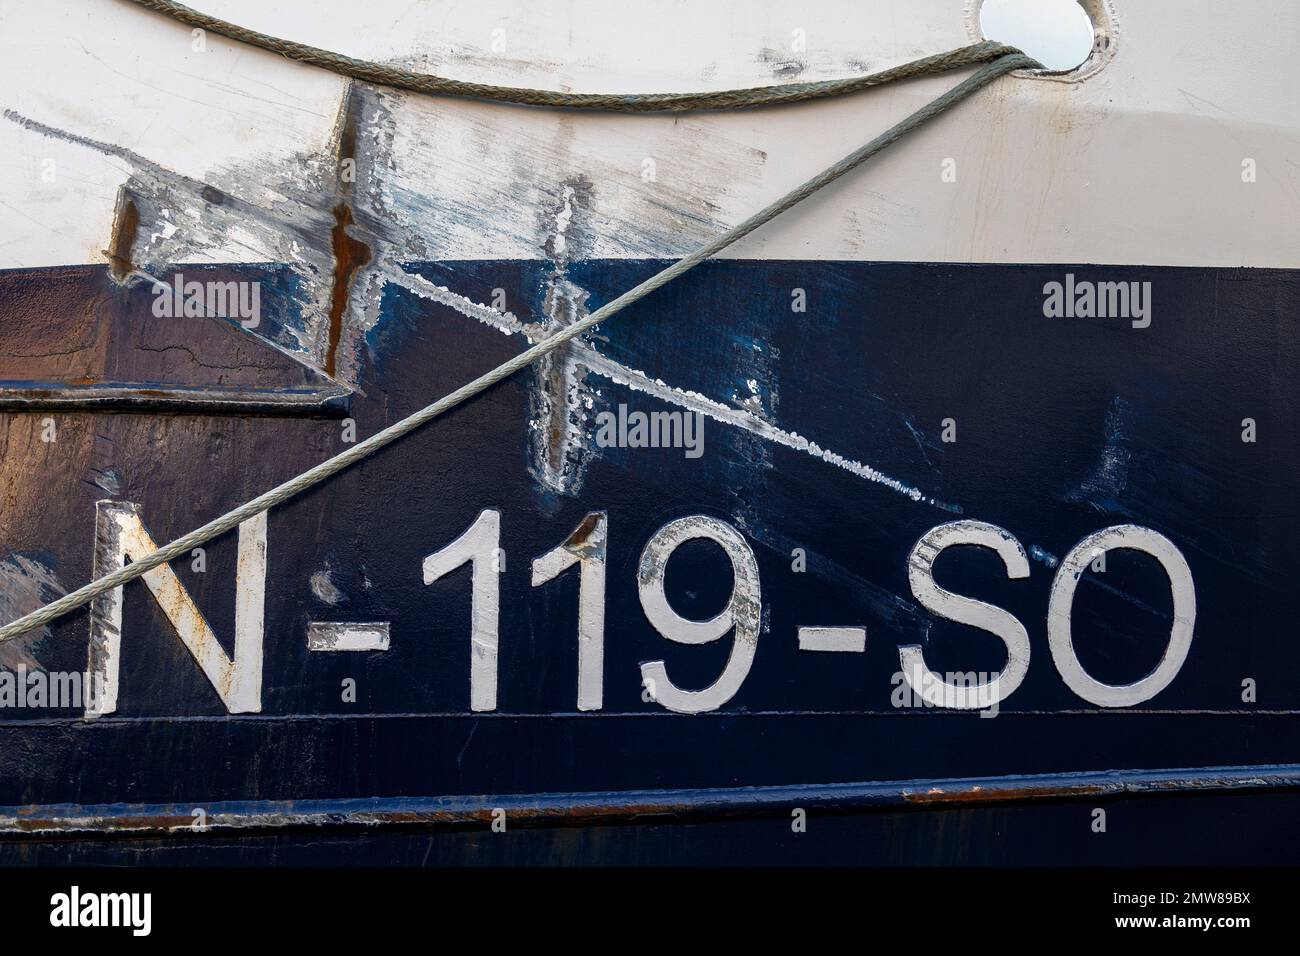 Fishing vessel Ketlin at Bryggen quay, in the port of Bergen, Norway. Vessel name and markings Stock Photo